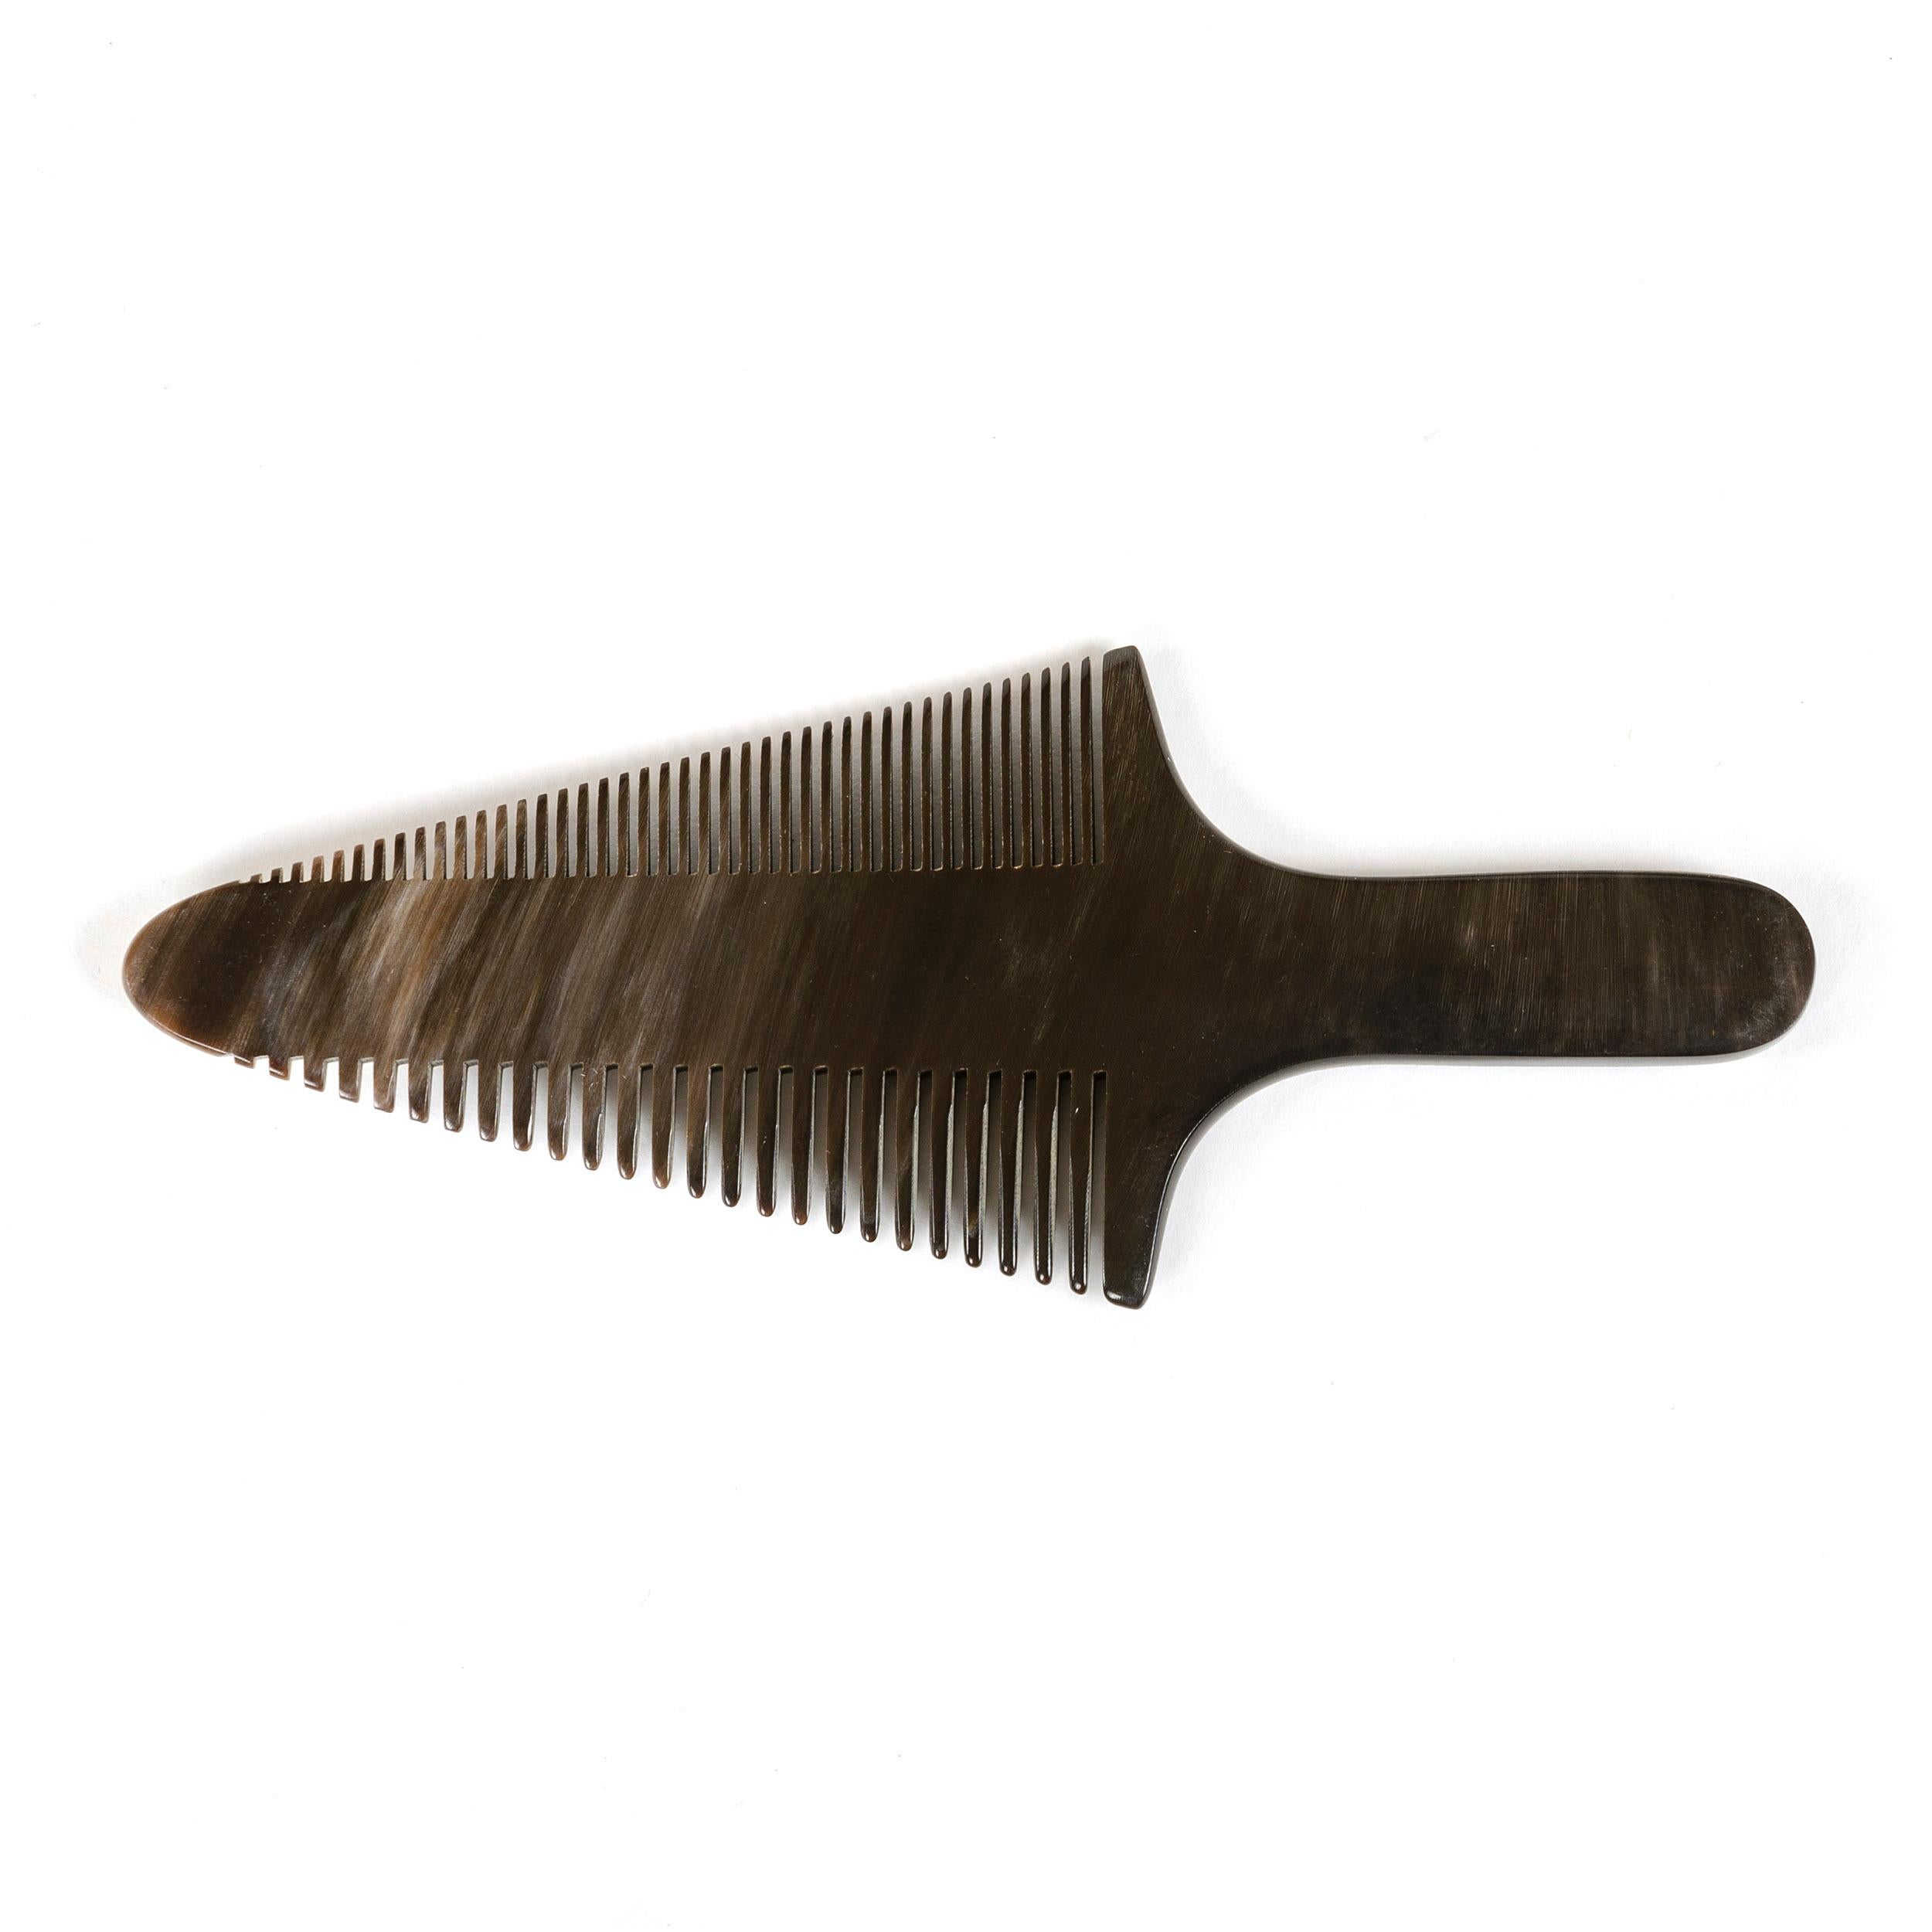 An elegant comb hand carved from cow Horn with naturally occurring variations in color and pattern.